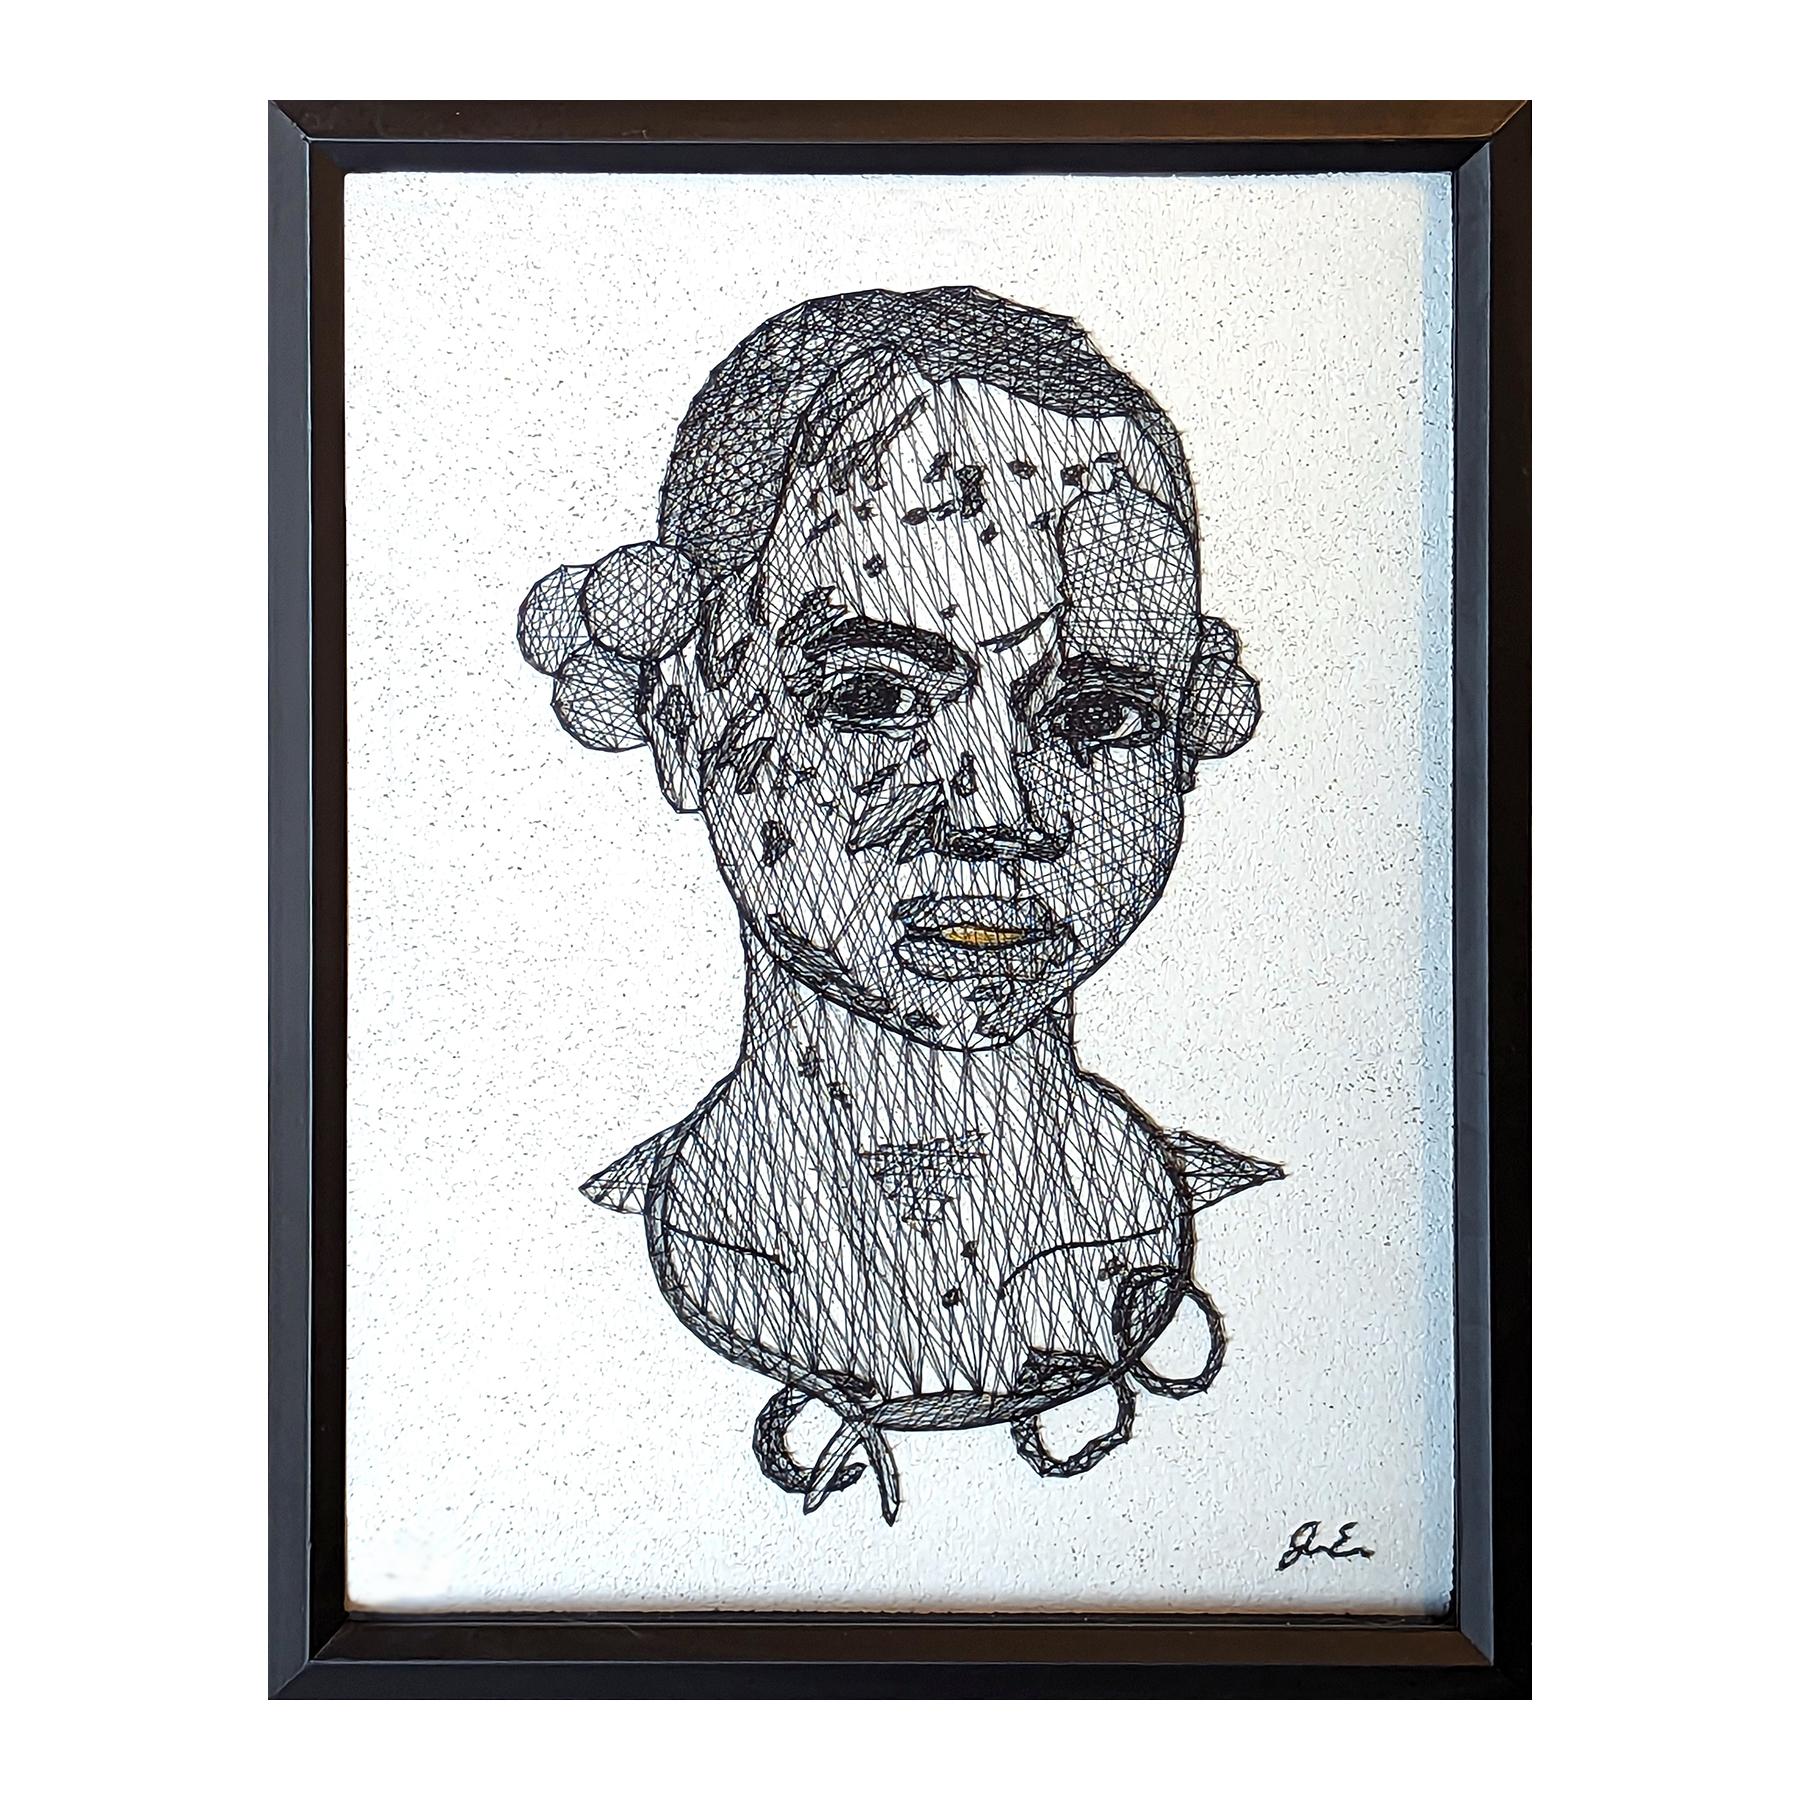 Contemporary black and white mixed media portrait by Houston-based artist Jaymes Earl. The work features an abstract portrait made of strategically placed pins wrapped in embroidery floss. Signed by the artist in the front lower right corner.